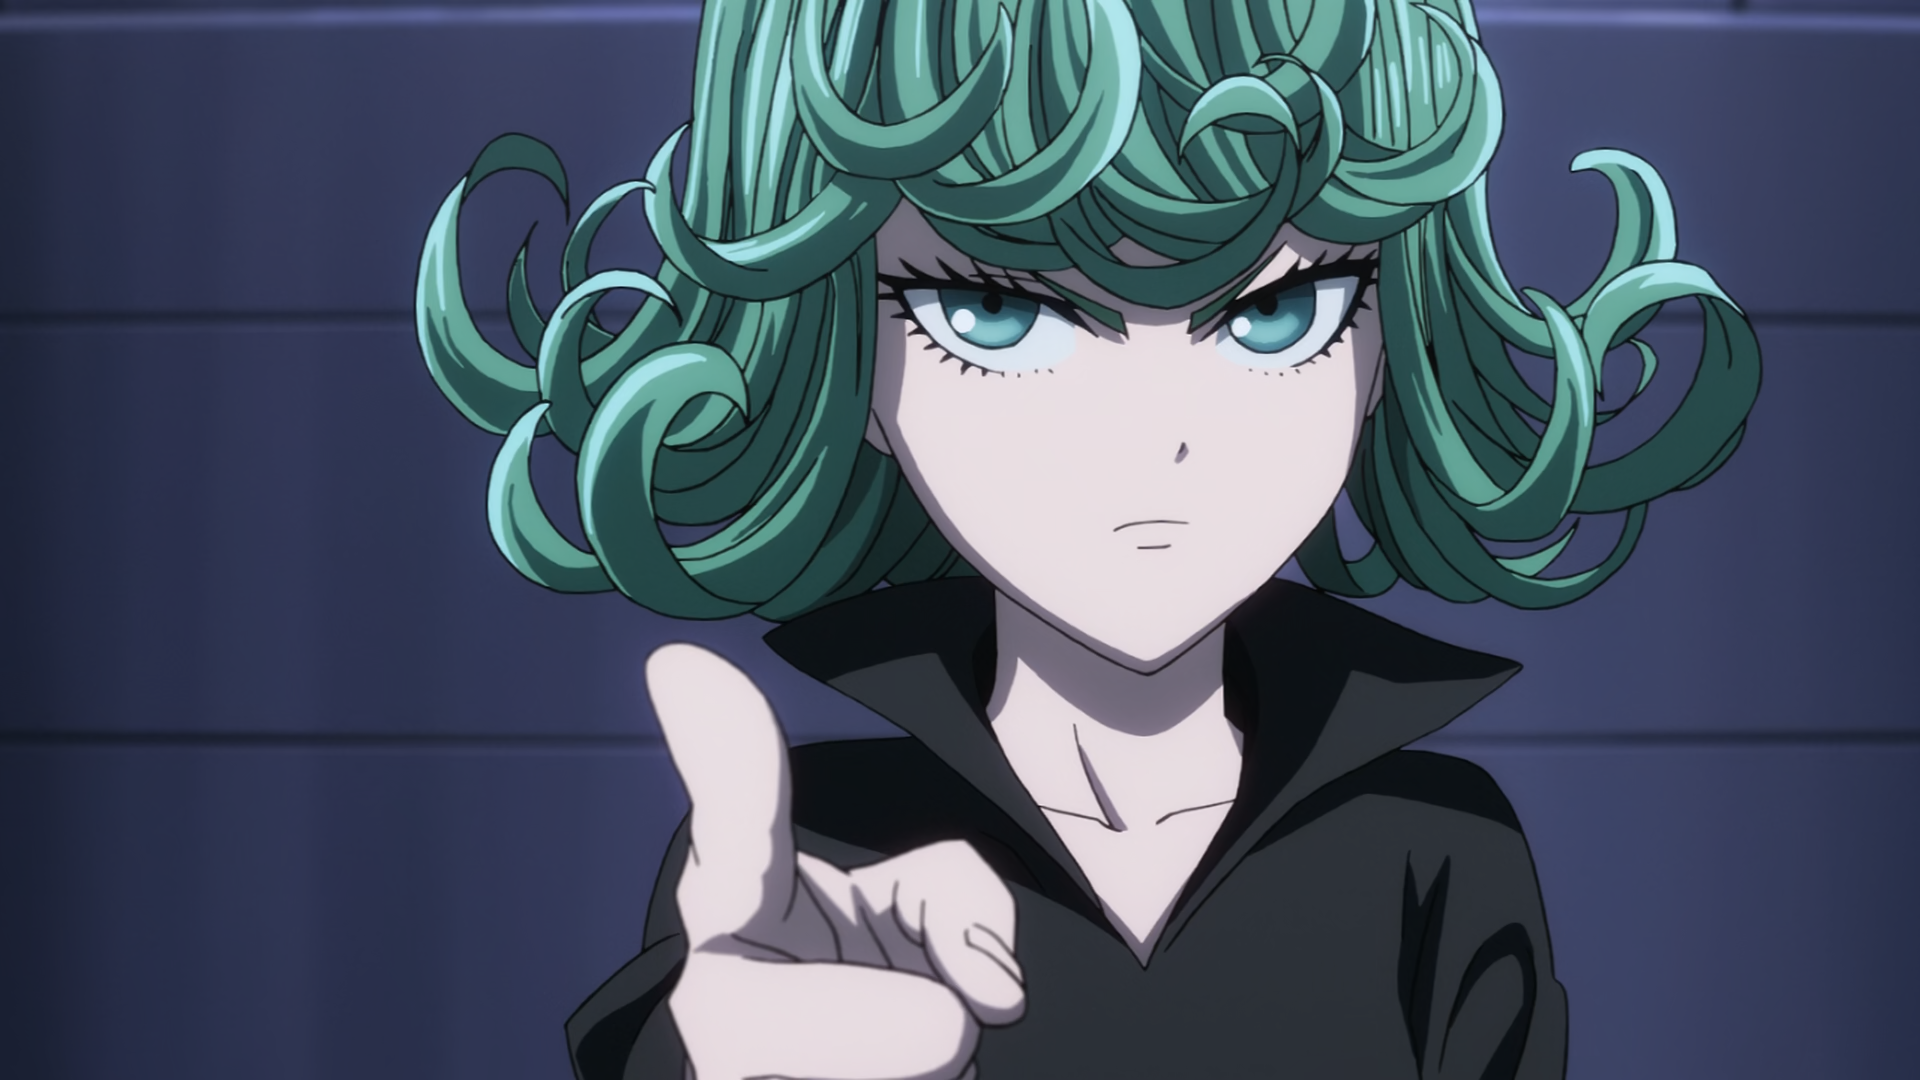 One-Punch Man Season 2 is Worse Than Season 1 - Here's Why